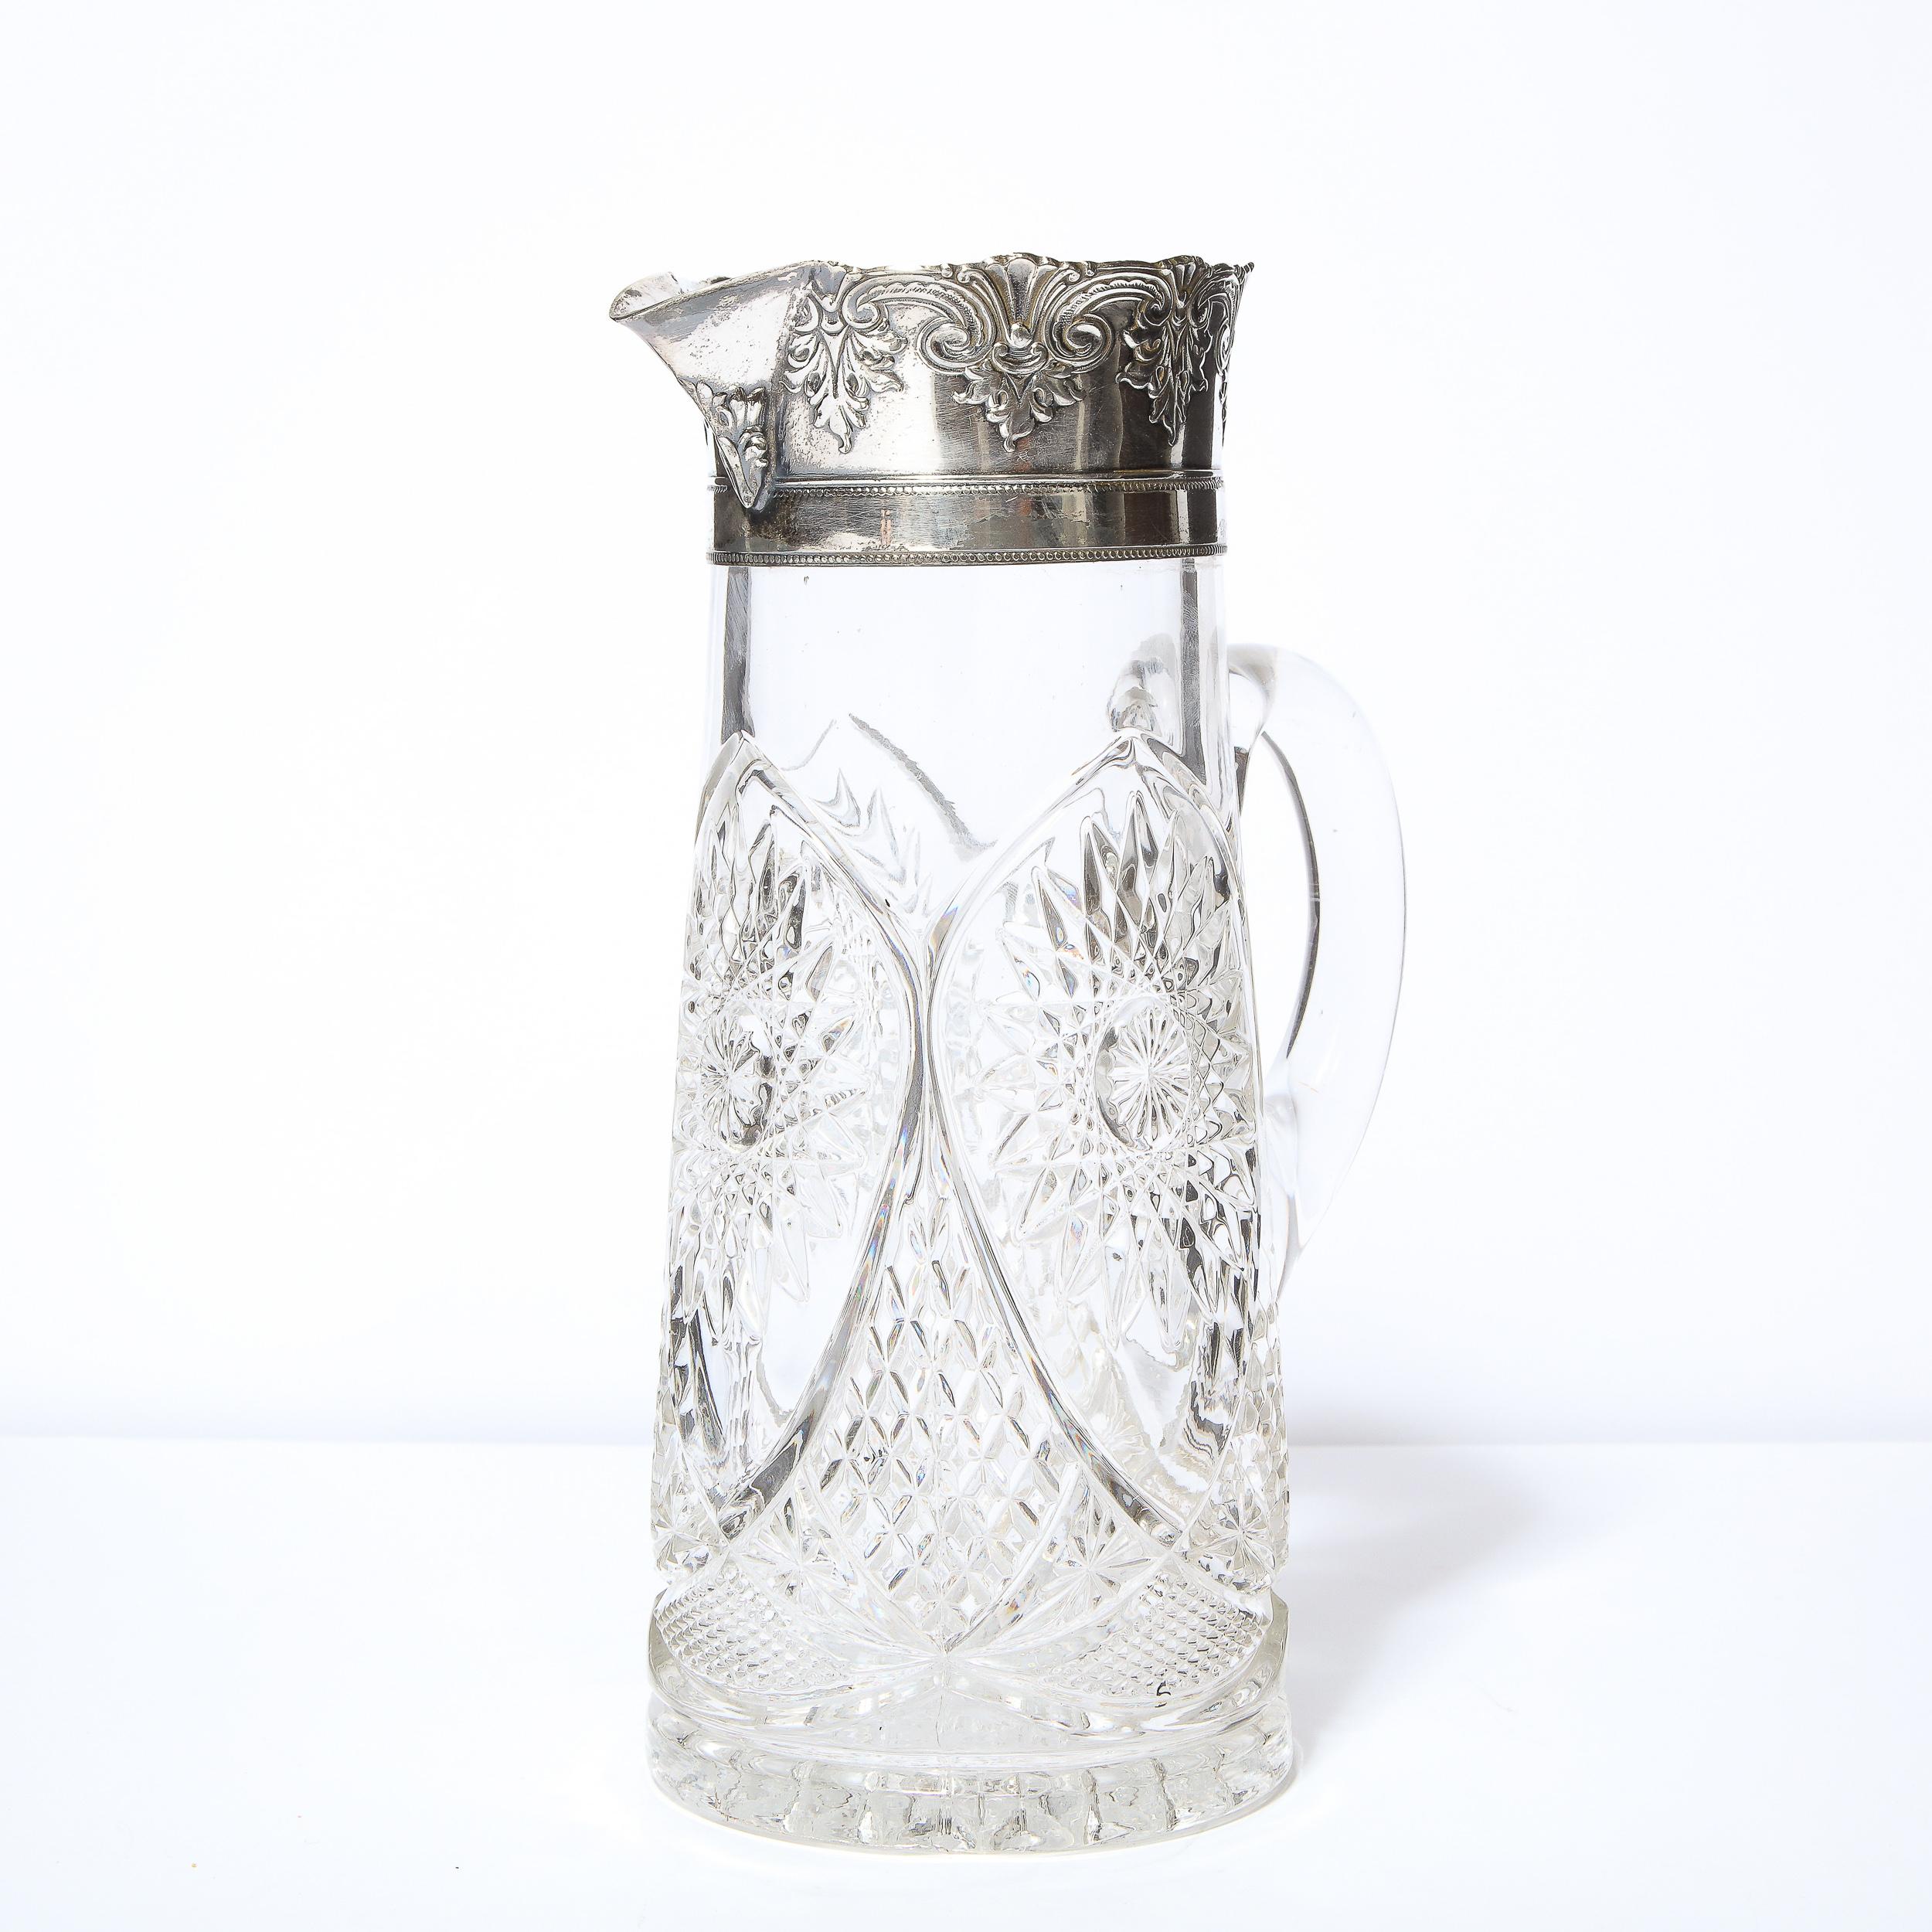 1940s Art Deco Pressed Glass Pitcher with Geometric Details & Silver Plated Top 1